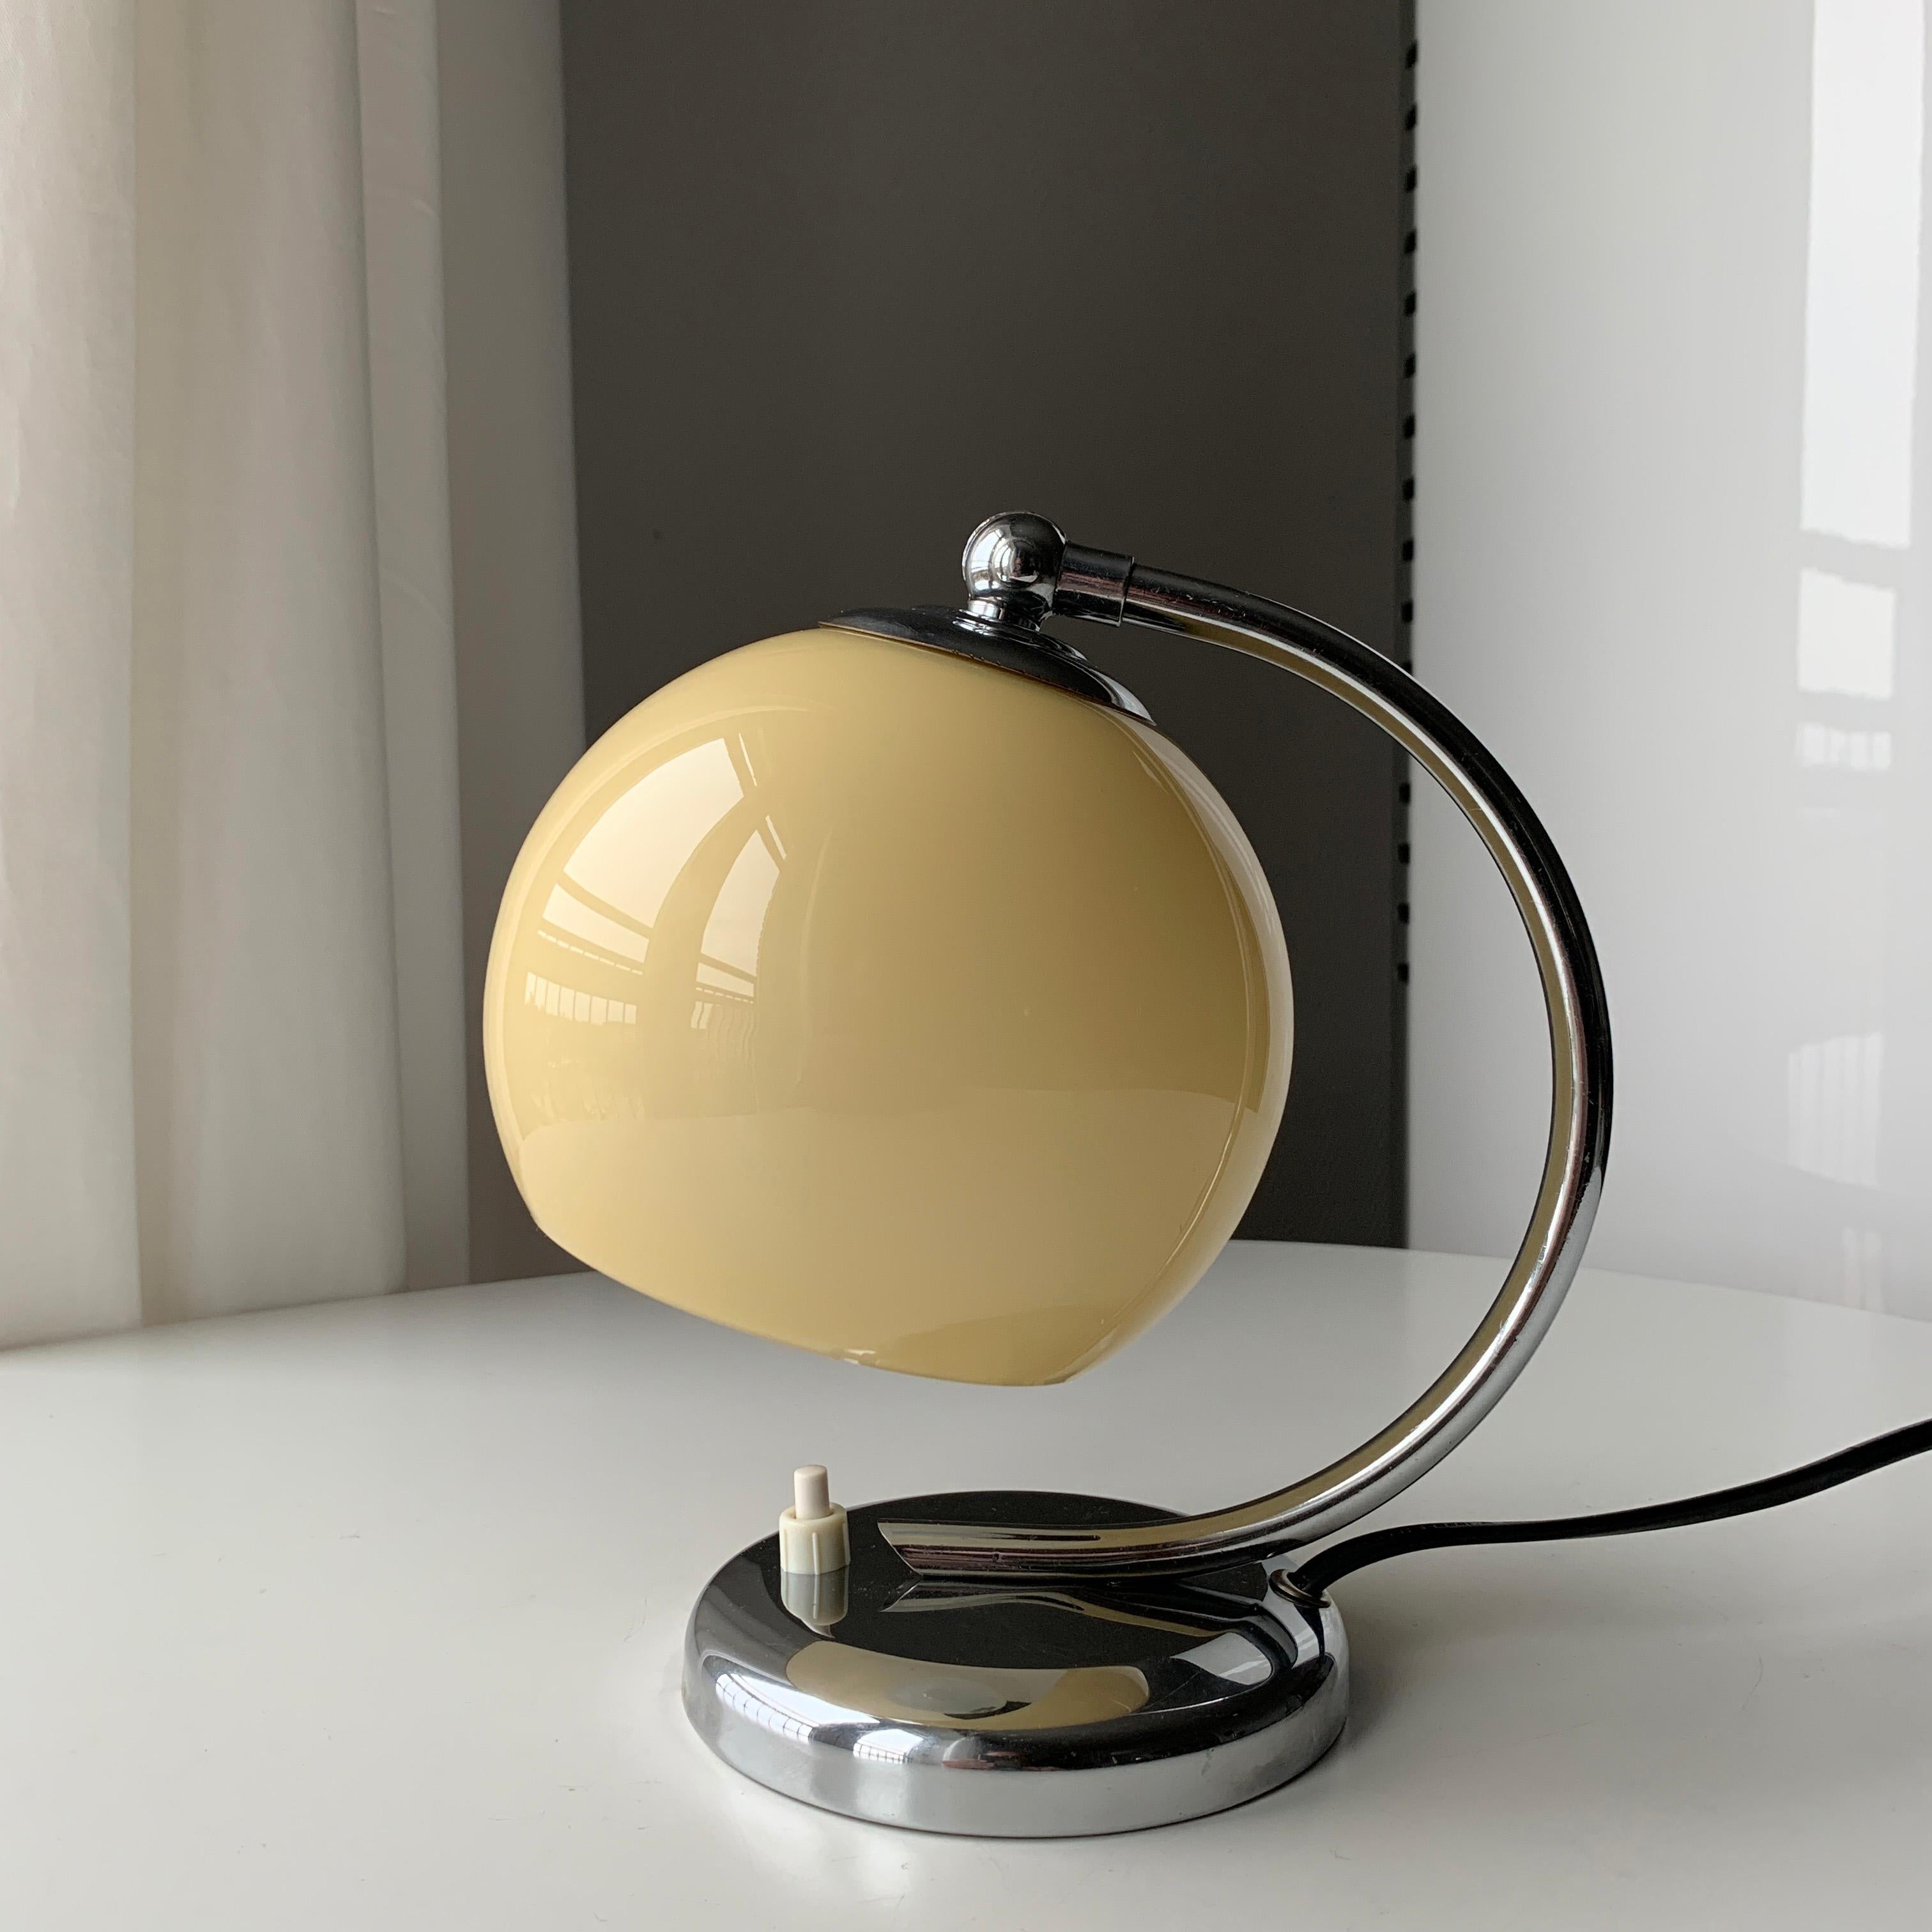 Danish Art Deco chrome table lamp manufactured by Danish company Fog & Mørup in the period of 1920s-1950s. Most likely a model in the 6200 range from the start of the century. The 6100/6200 series from Fog & Mørup was based on the same design with a